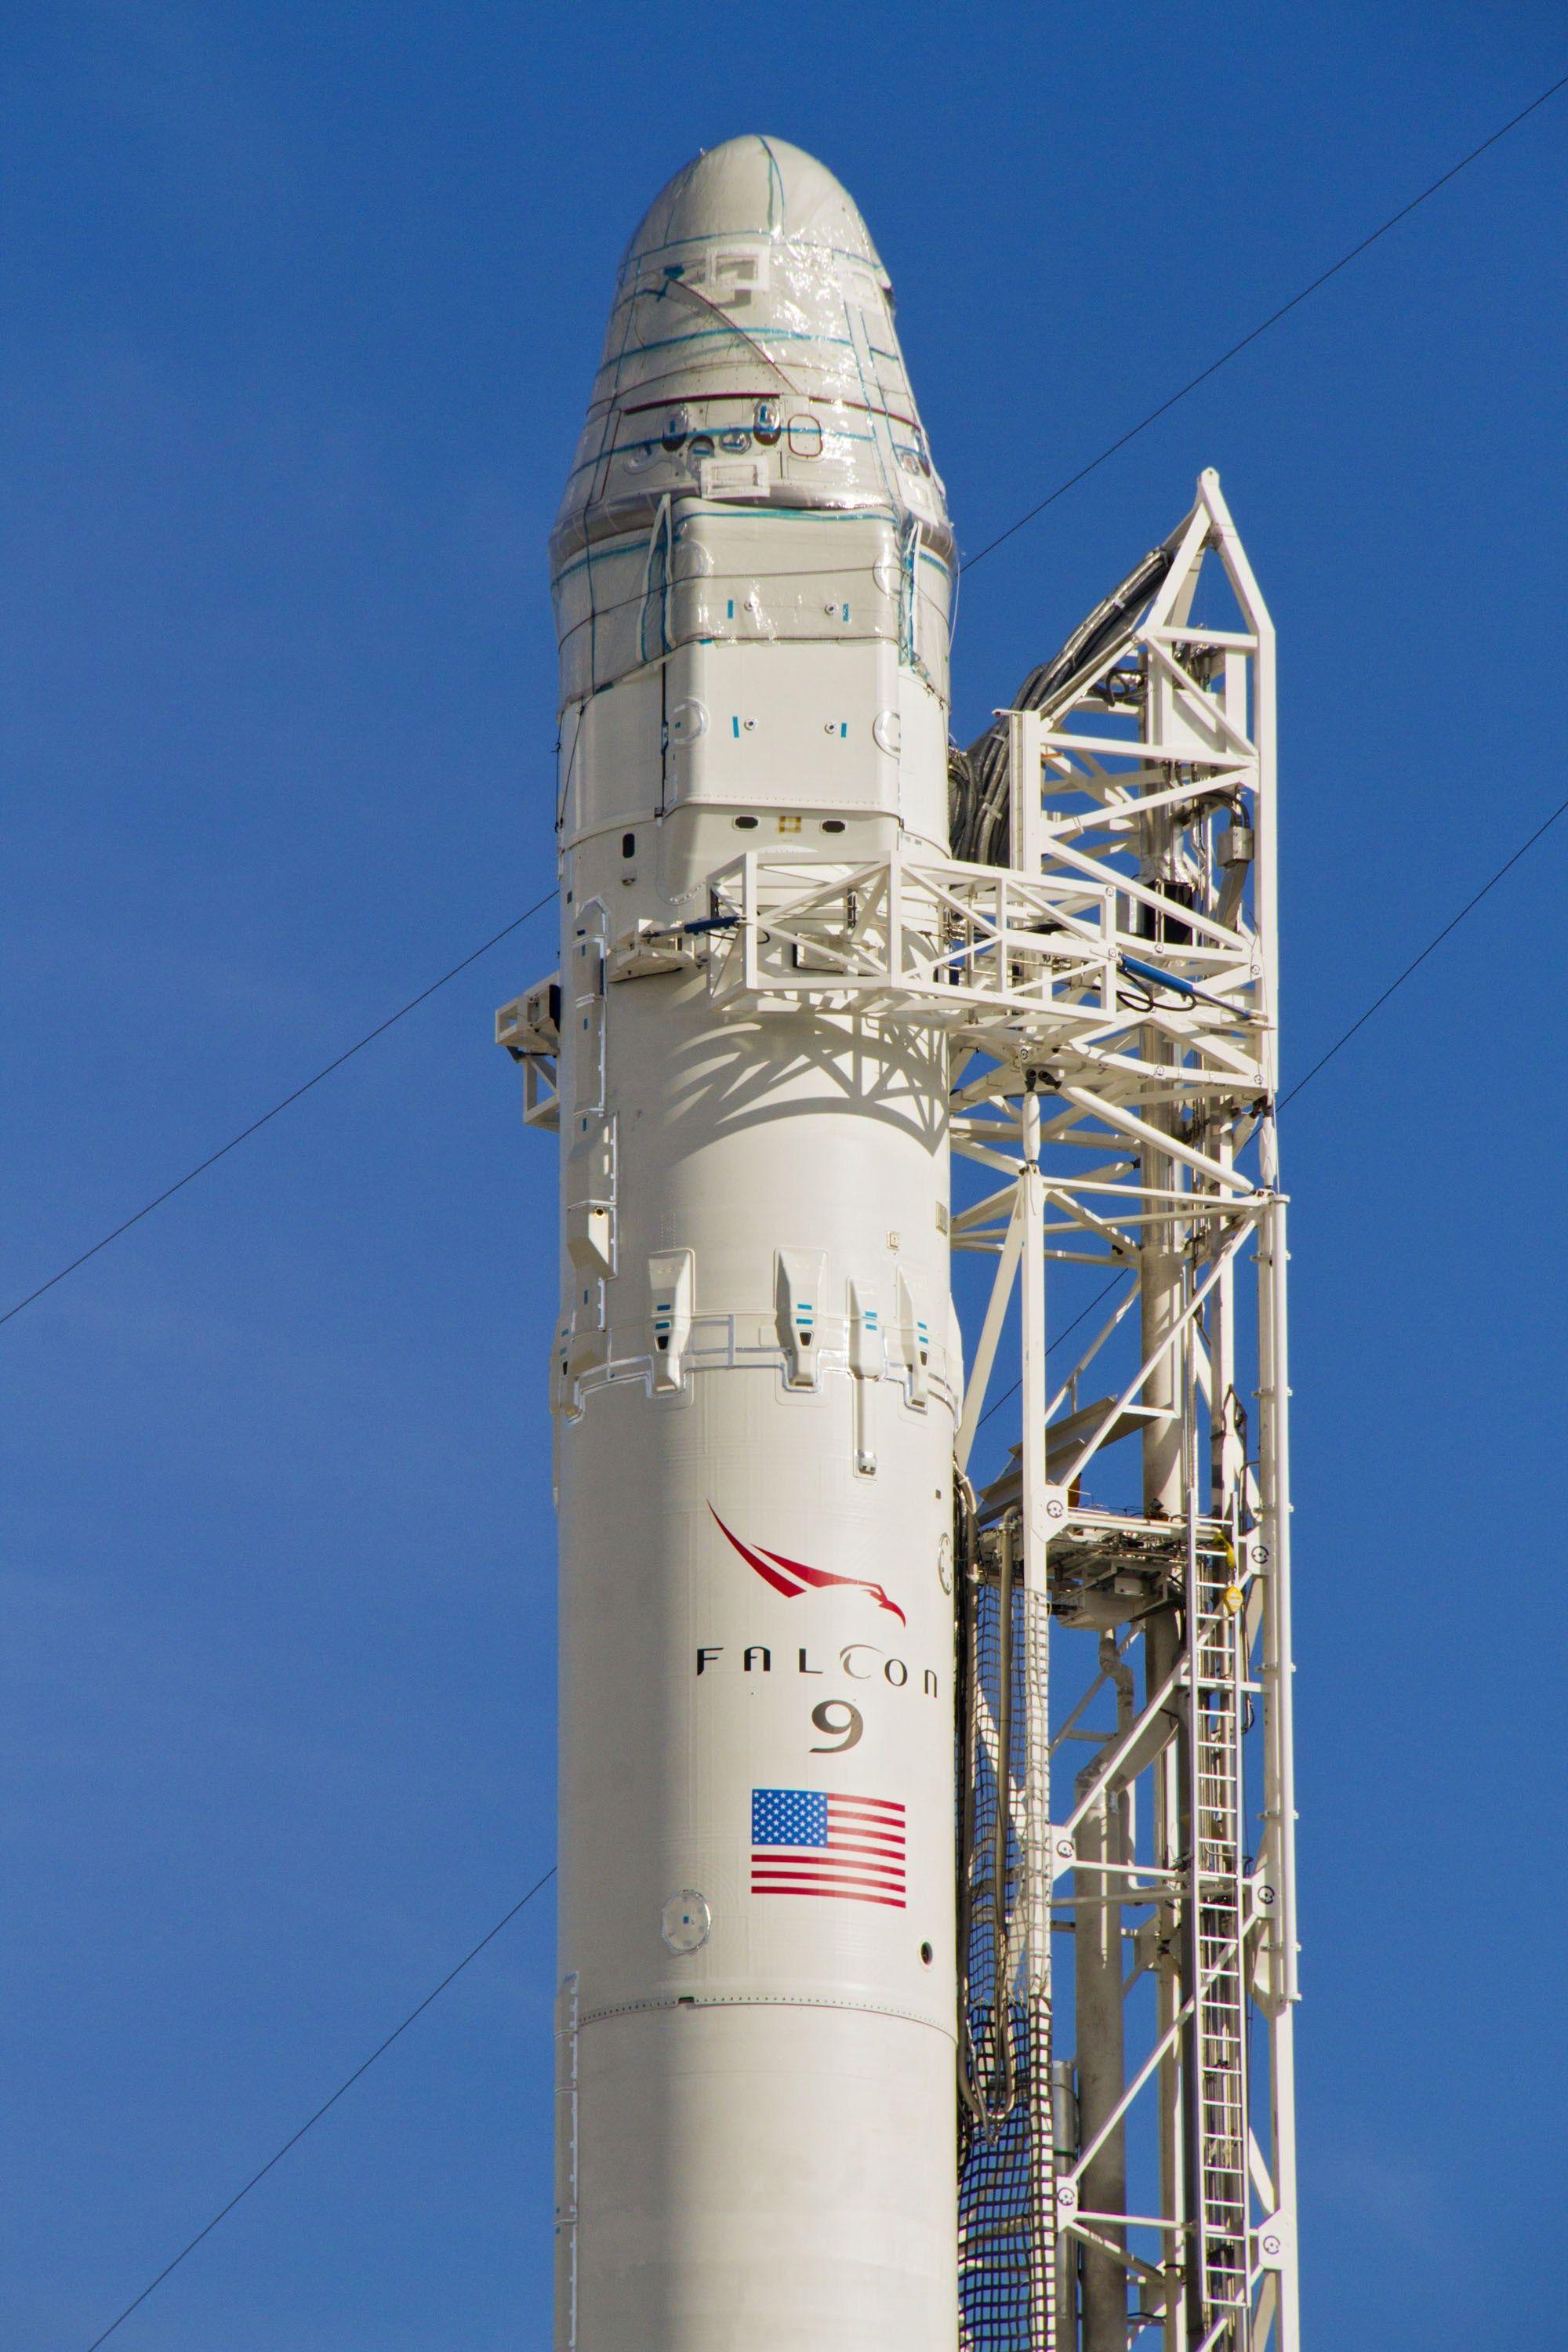 Dragon Falcon 9 Logo - Approaching the Countdown for SpaceX's Dragon Spacecraft